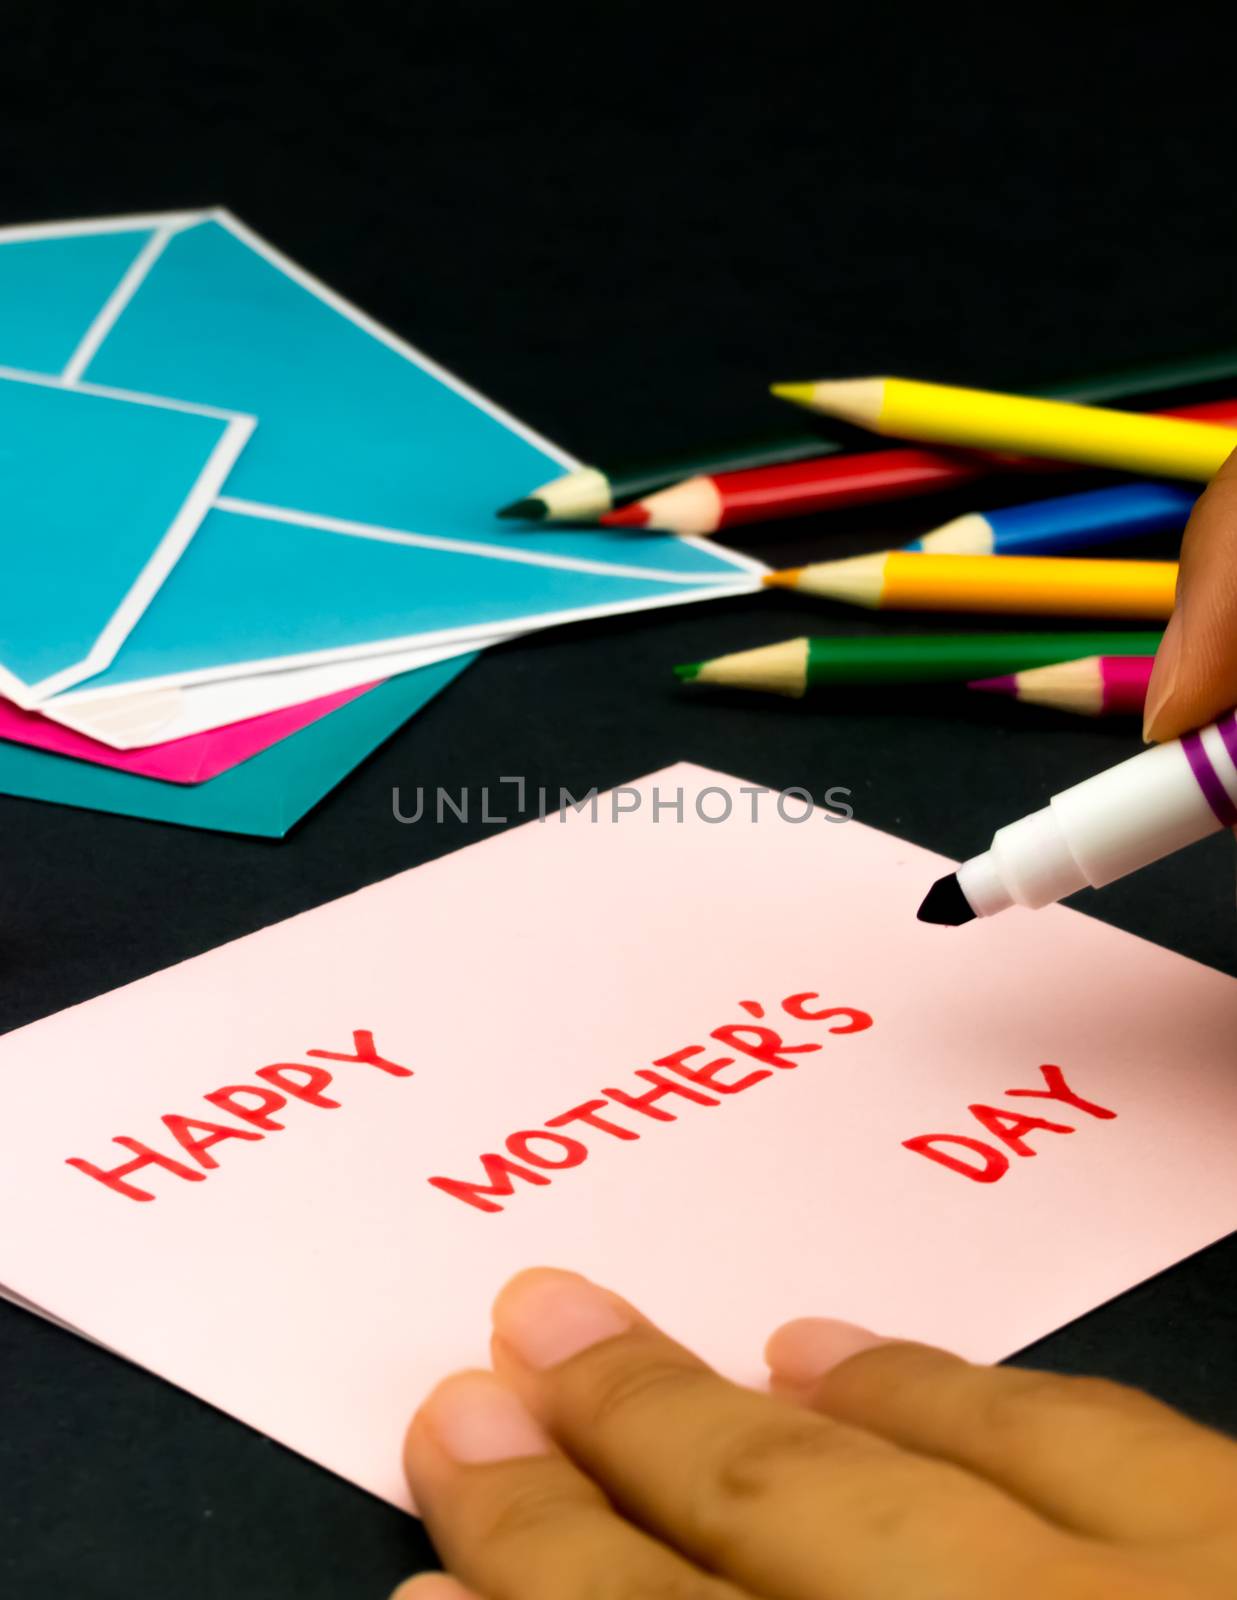 Message Card for Your Family and Friends; Happy Mother's Day